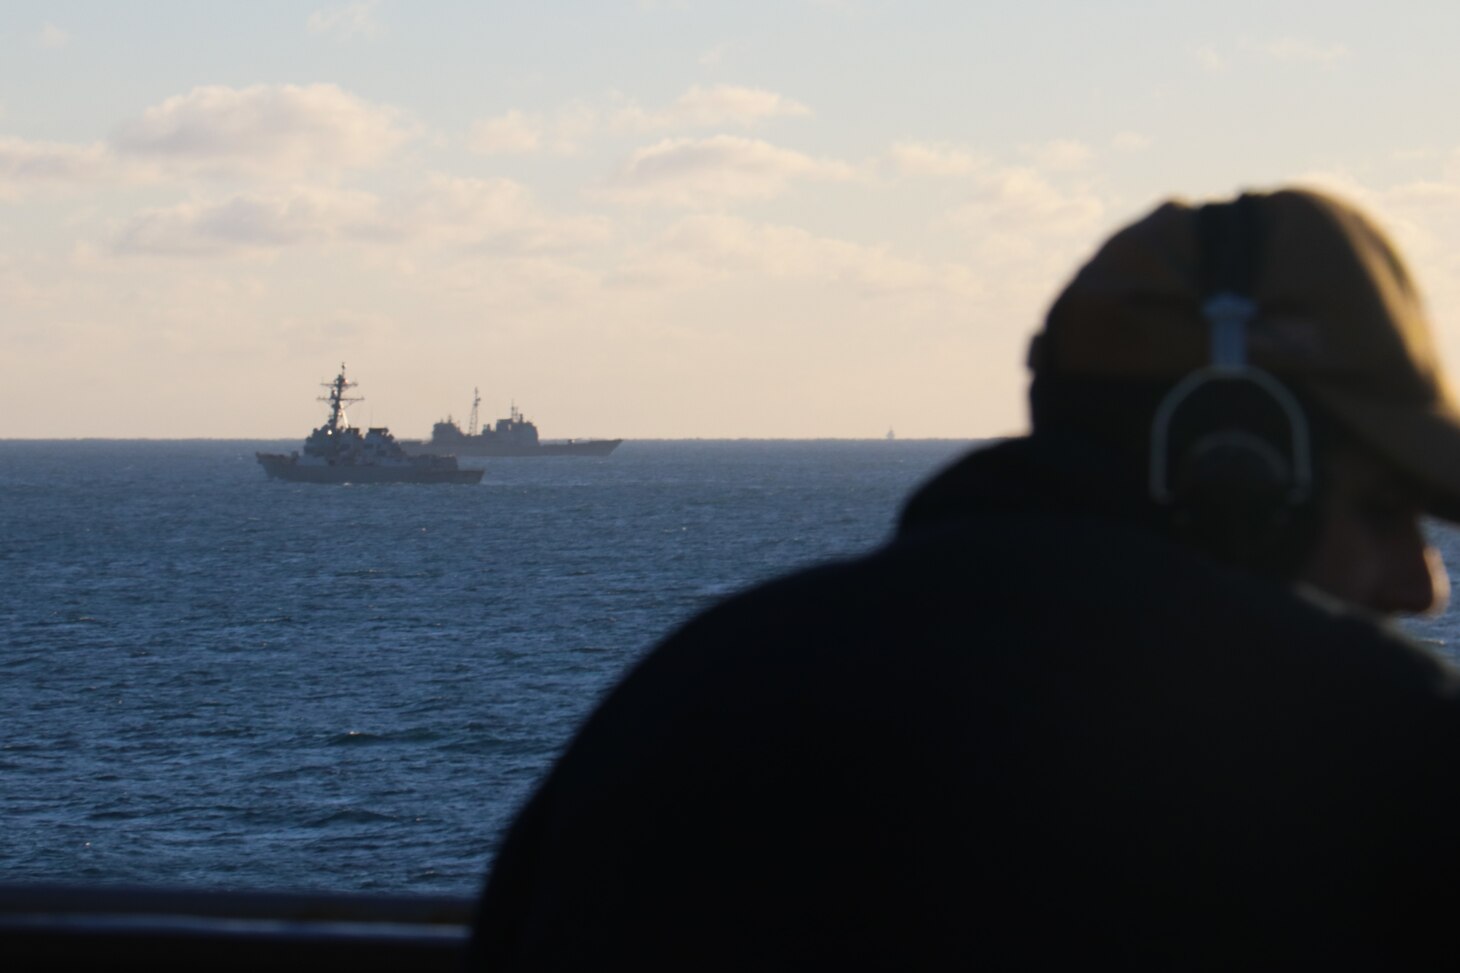 Seaman Rafael Mendez stands watch aboard the dock landing ship USS Carter Hall (LSD 50) while the guided-missile destroyer USS Oscar Austin (DDG 79) and the guided-missile cruiser USS Philippine Sea (CG 58) transit alongside debris from a high-altitude surveillance balloon. Carter Hall is the lead ship in debris recovery efforts led by the Navy, in joint partnership with the U.S. Coast Guard, with multiple units in support of the effort, including ships, aircraft, and an Explosive Ordnance Disposal mobile diving and salvage unit. At the direction of the President of the United States and with the full support of the Government of Canada, U.S. fighter aircraft under U.S. Northern Command authority engaged and brought down a high altitude surveillance balloon within sovereign U.S. airspace and over U.S. territorial waters Feb. 4, 2023. Active duty, Reserve, National Guard, and civilian personnel planned and executed the operation, and partners from the U.S. Coast Guard, Federal Aviation Administration, and Federal Bureau of Investigation ensured public safety throughout the operation and recovery efforts.